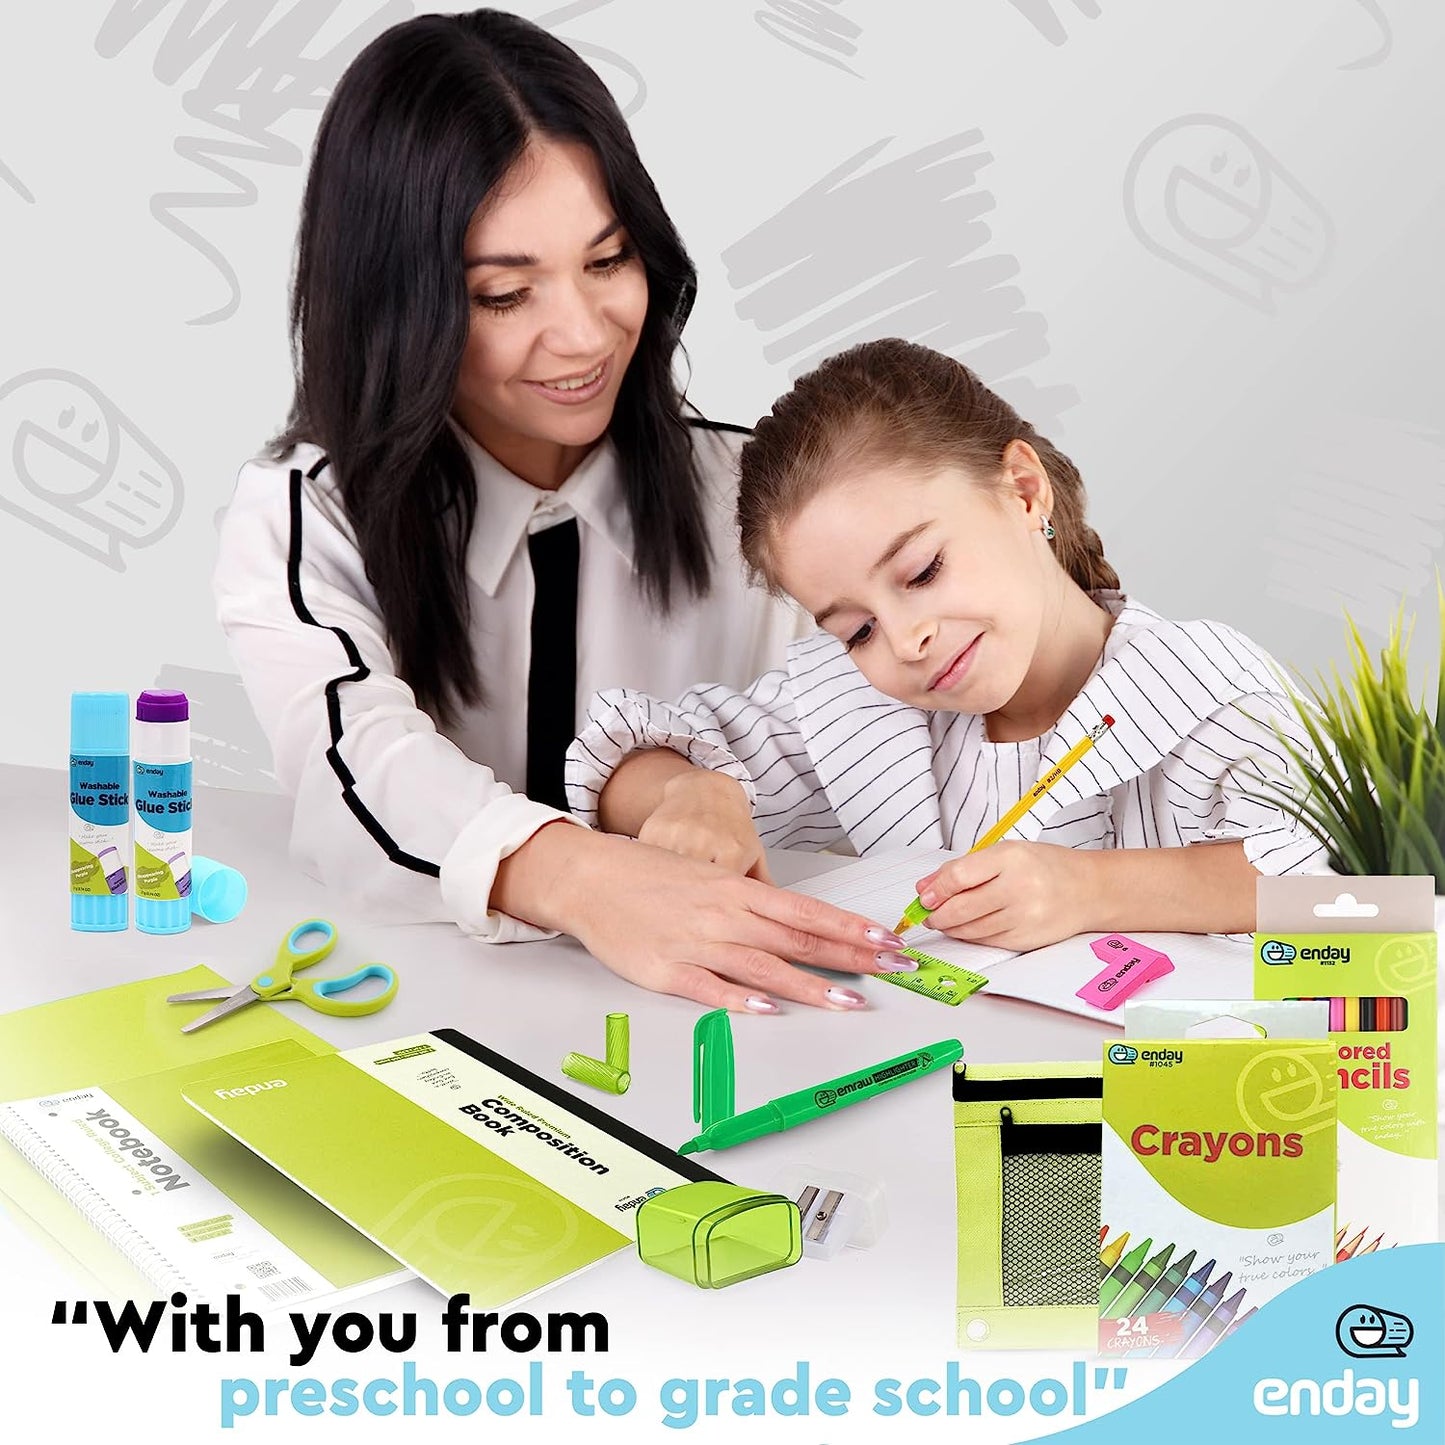 Back to School Supplies Kit - Green